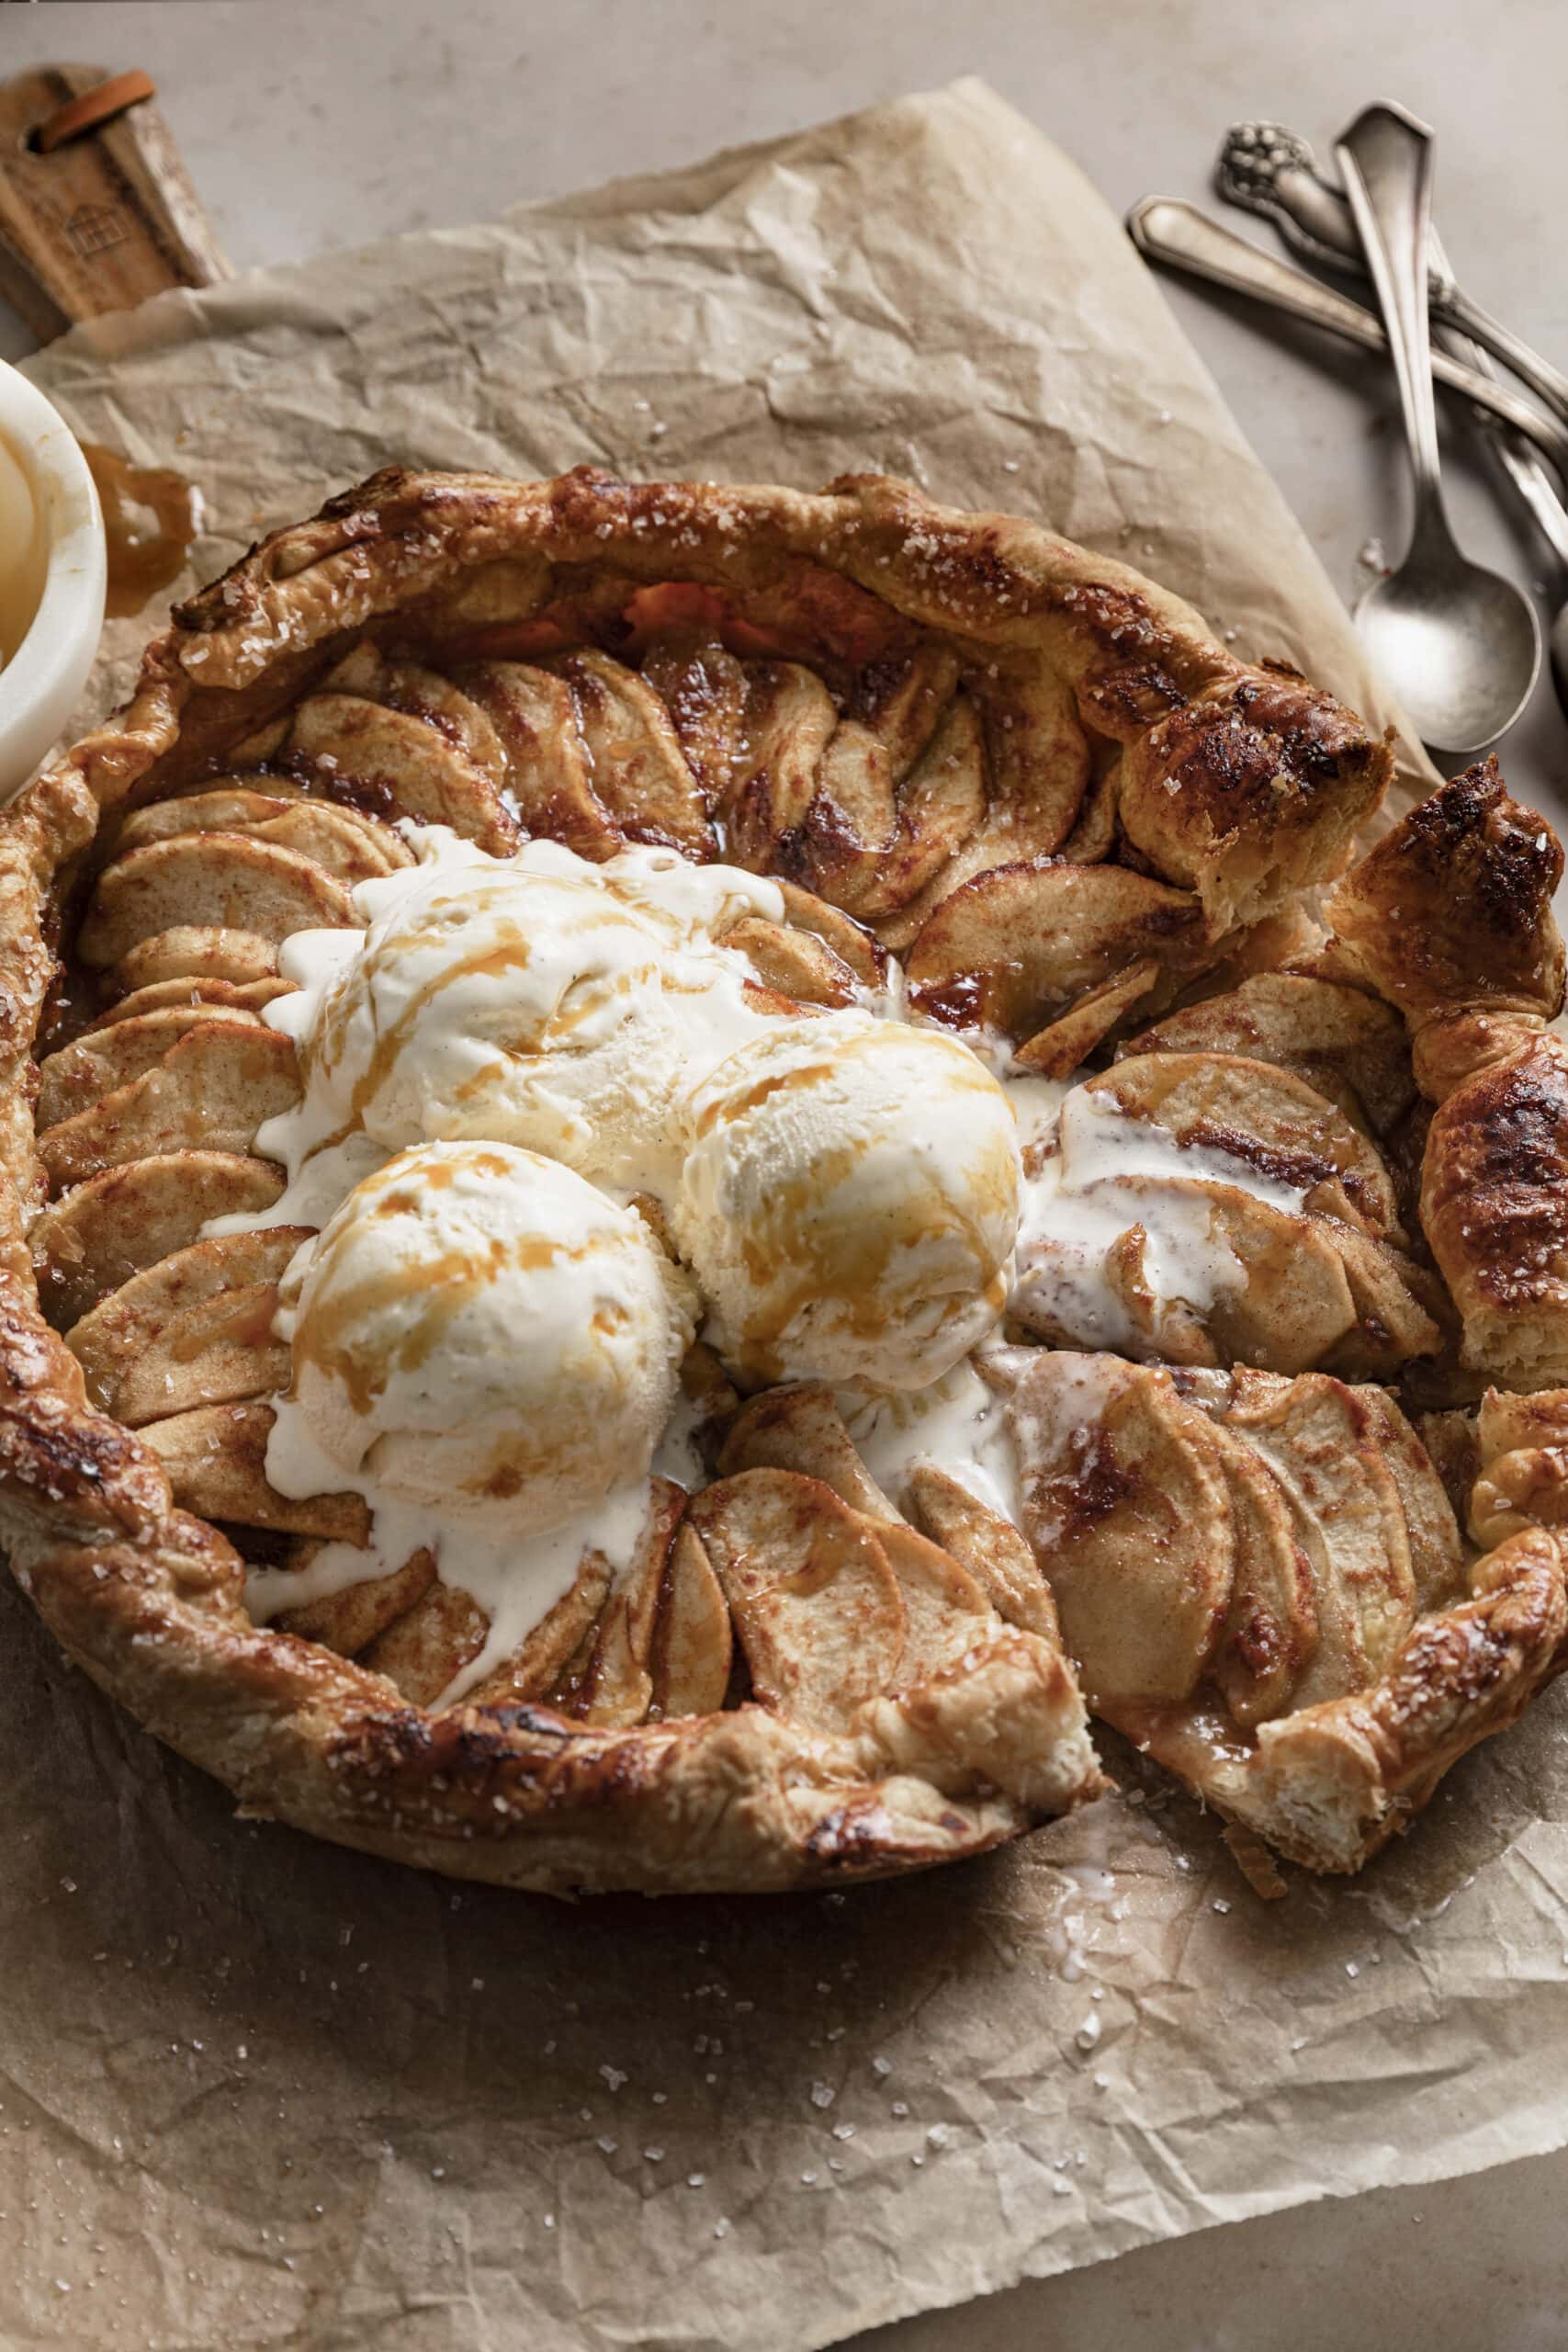 Apple Galette with puff pastry served with vanilla ice cream and caramel sauce, placed on parchment paper on a wood board.